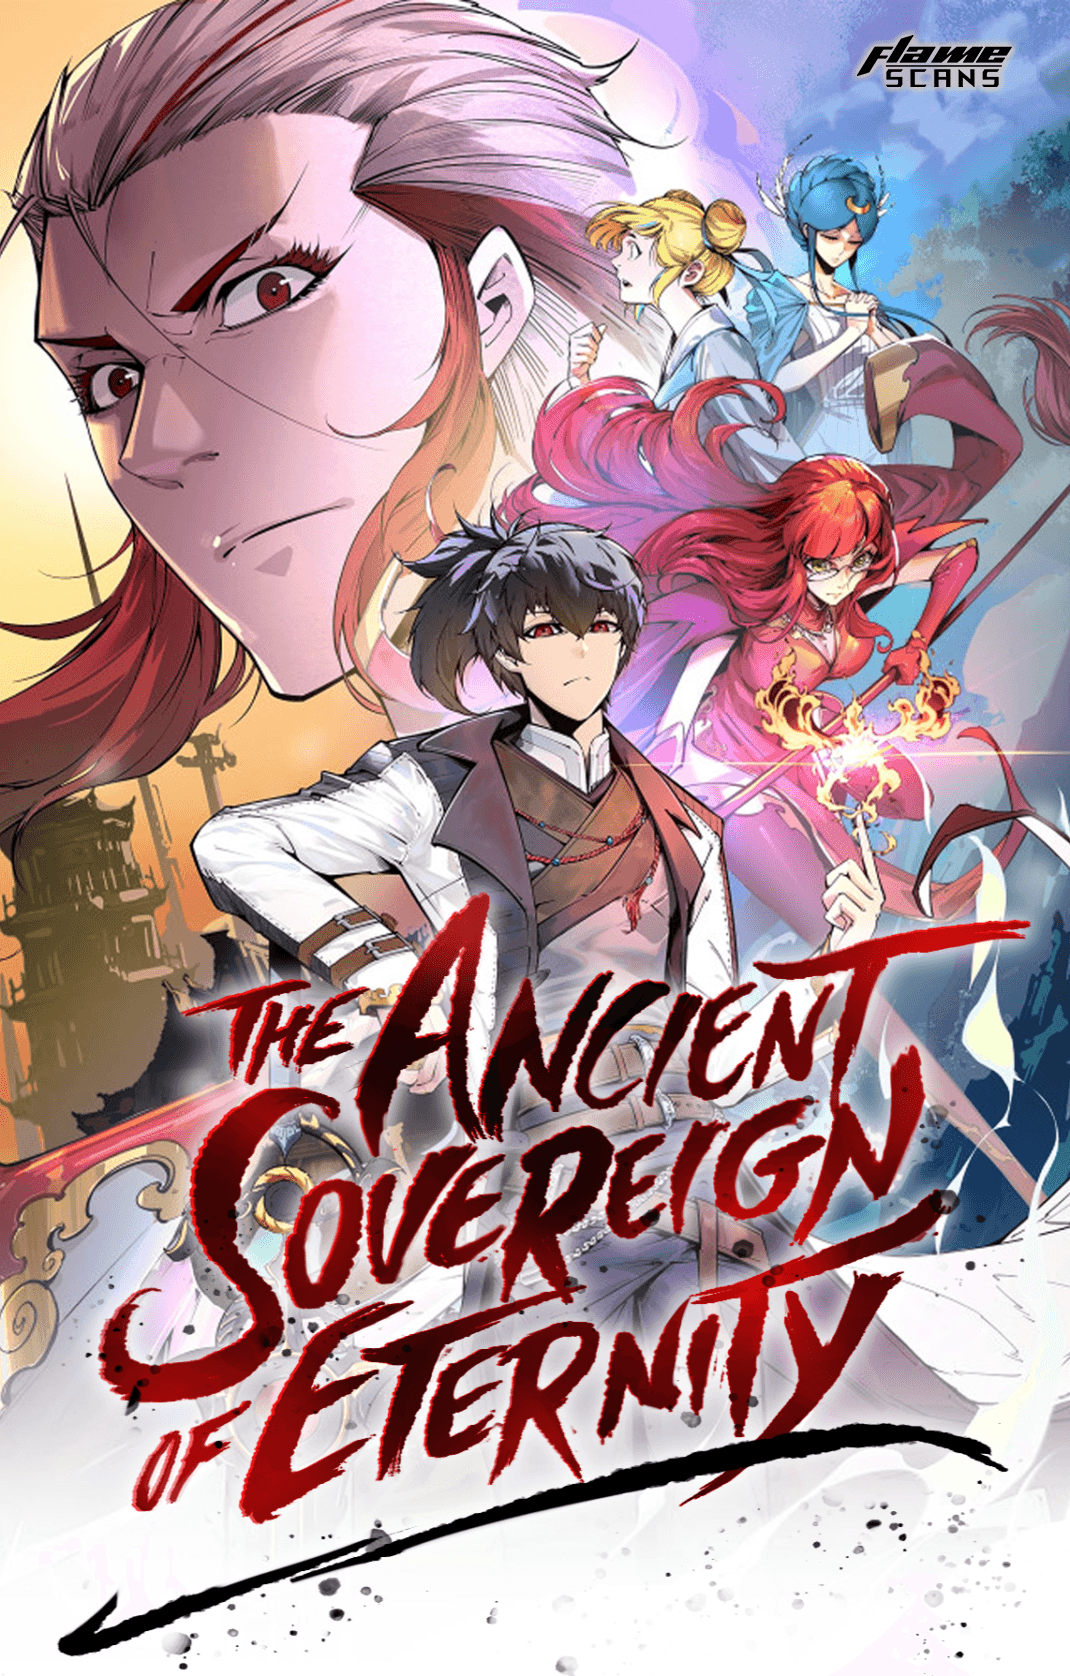 The Ancient Sovereign of Eternity cover image